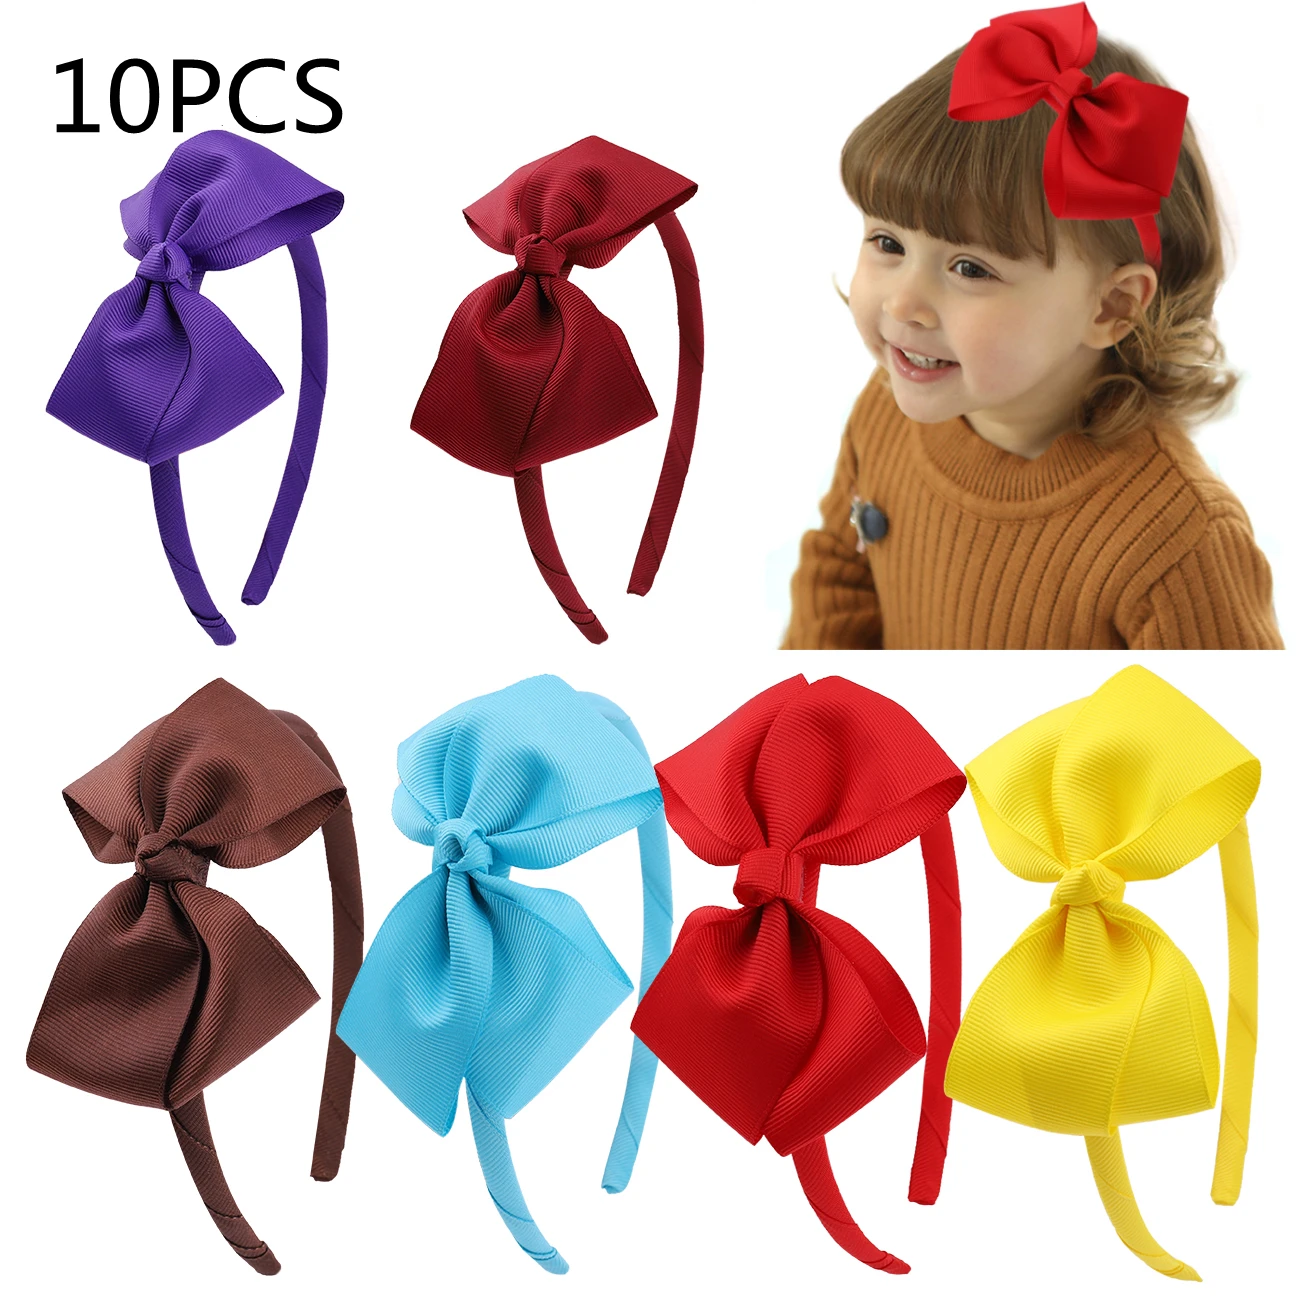 10PCS Wholesale Ribbon Red Headband for Girls Kids Knot Headwears Solid Color Wide Big Bow Hair Band Hair Accessories